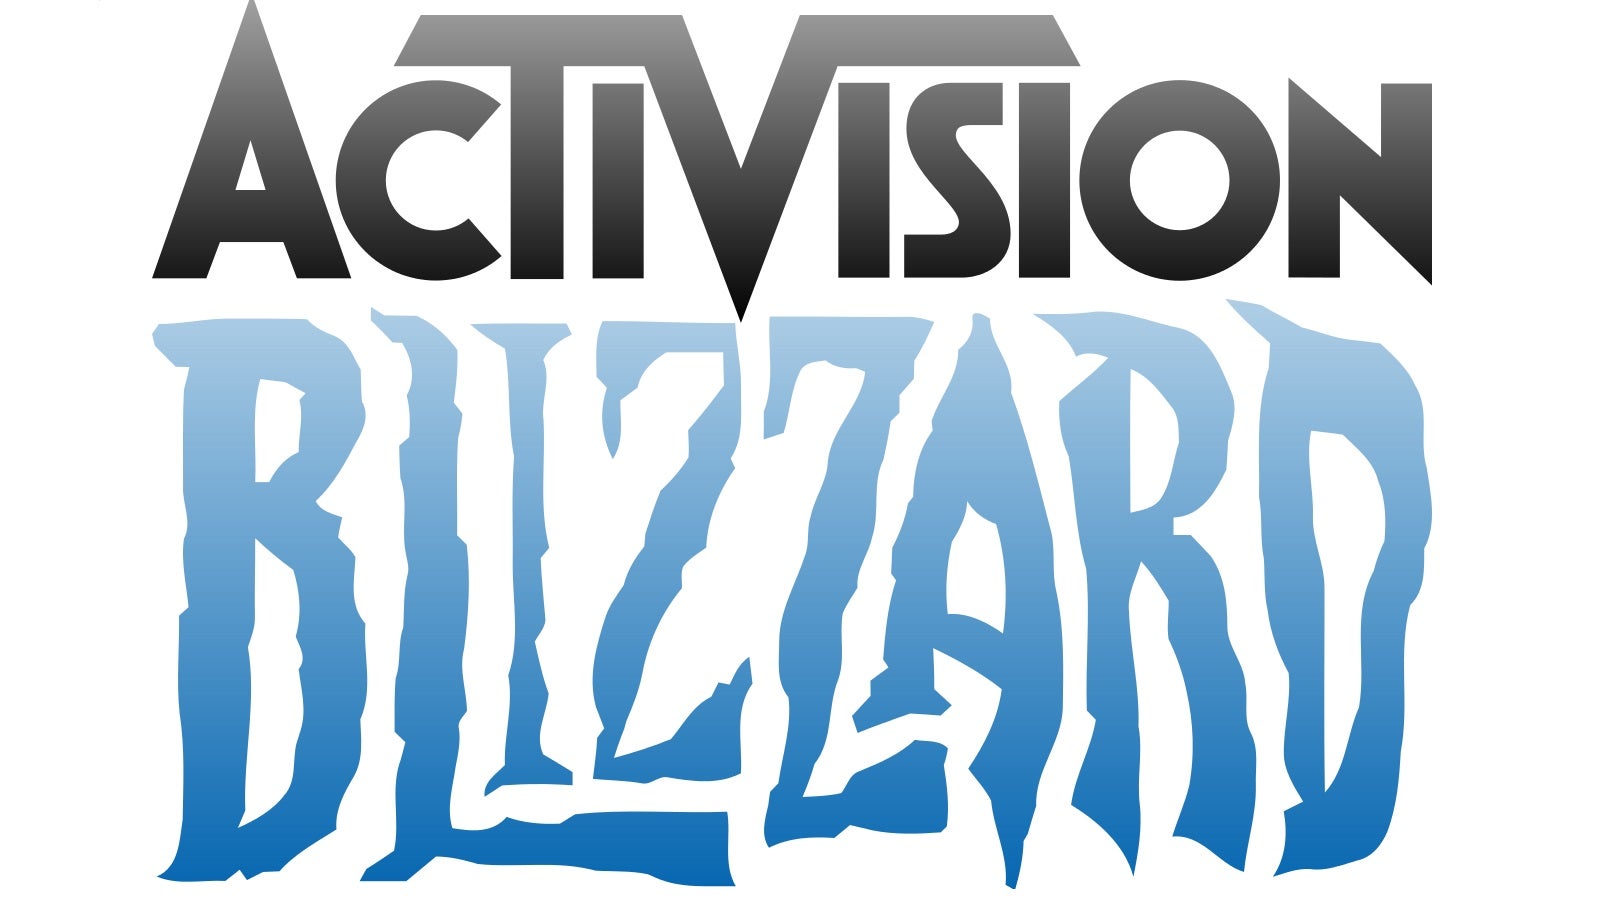 Image for Activision Blizzard are now being investigated by the US government